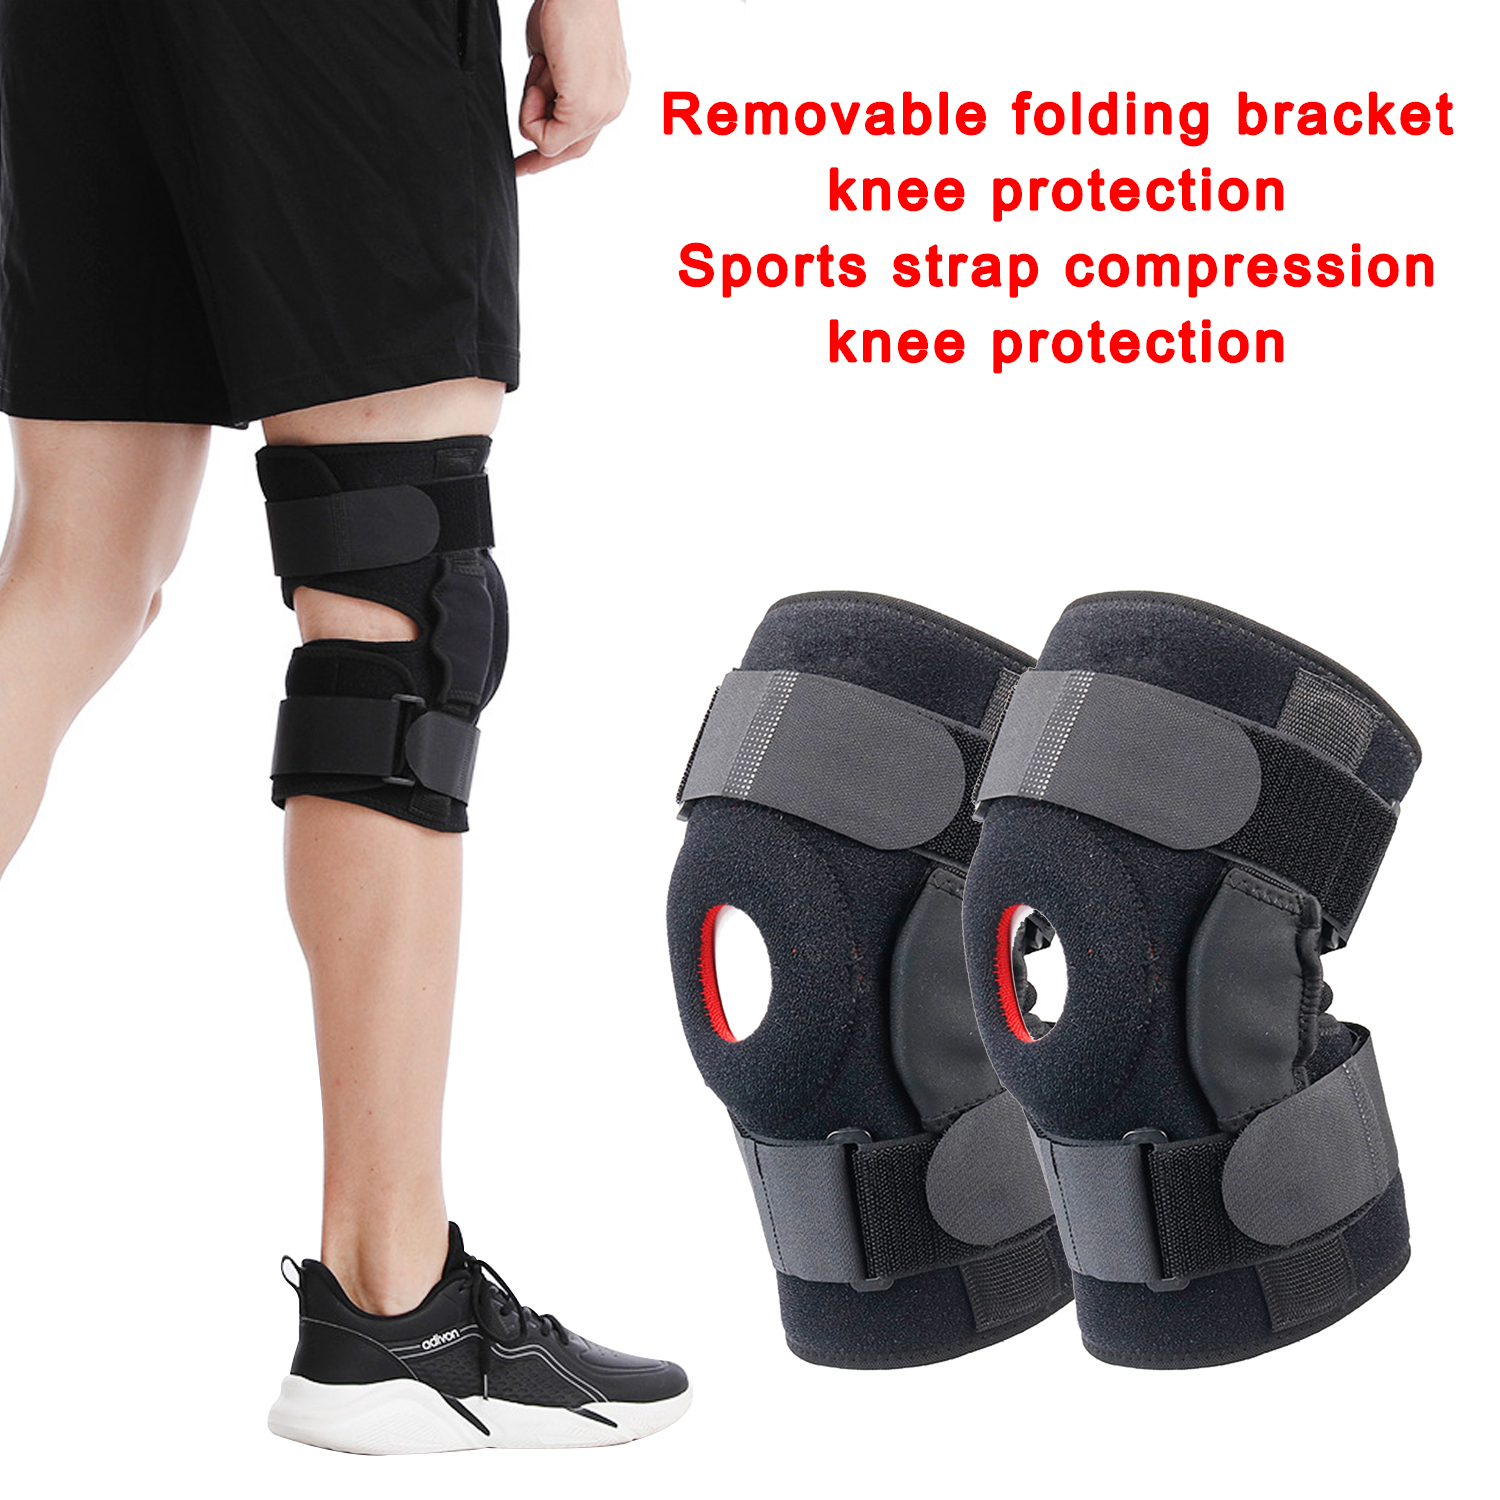 Removable Folding Support Knee Pads Silicone Patella Knee Pads Knee Support Brace Immobilizer Knee Braces Pads